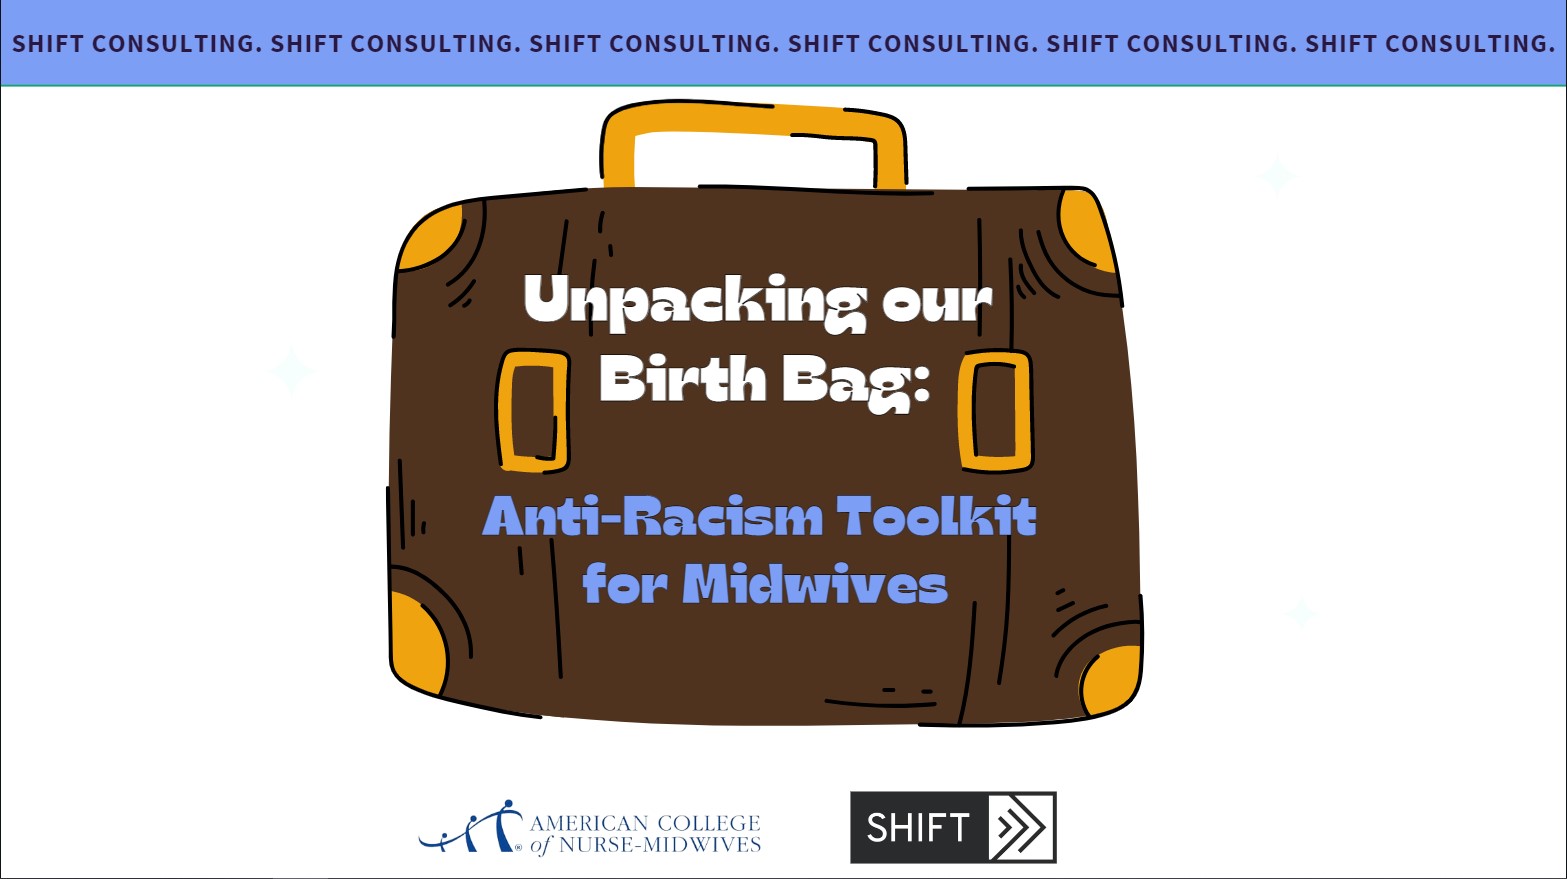 Anti-Racism Toolkit for Midwives